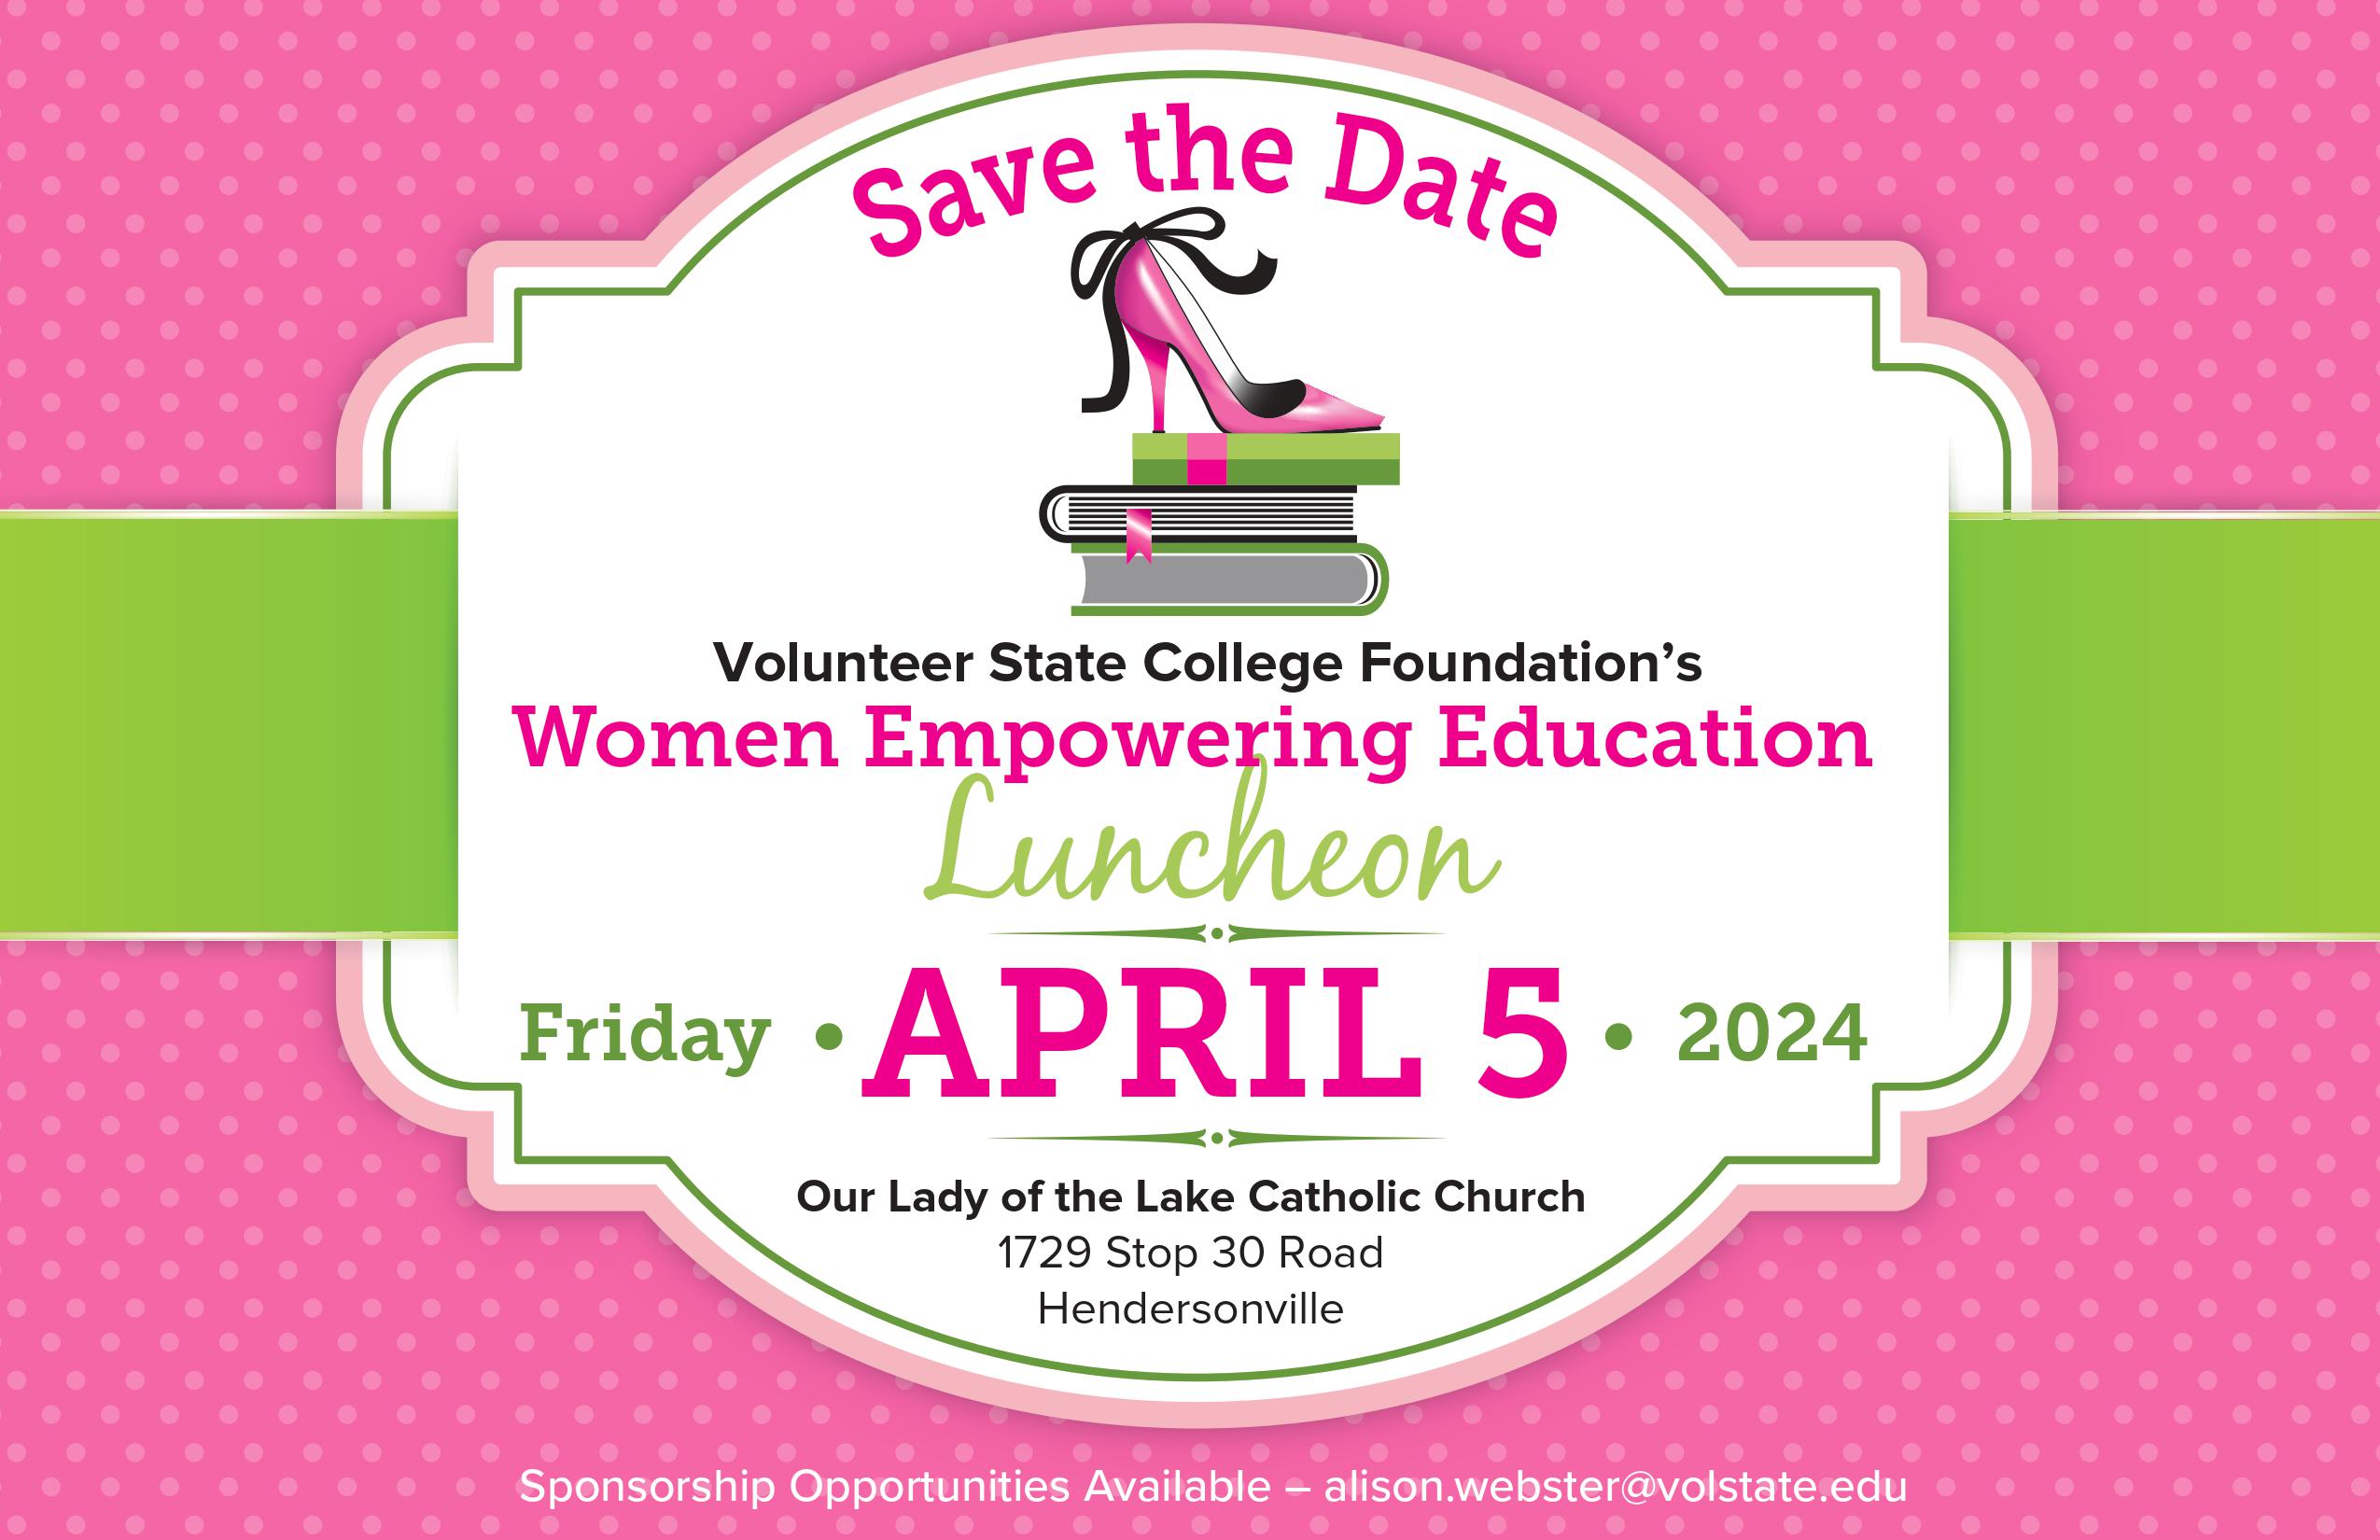 Save the Date - April 5 - Women Empowering Education Luncheon